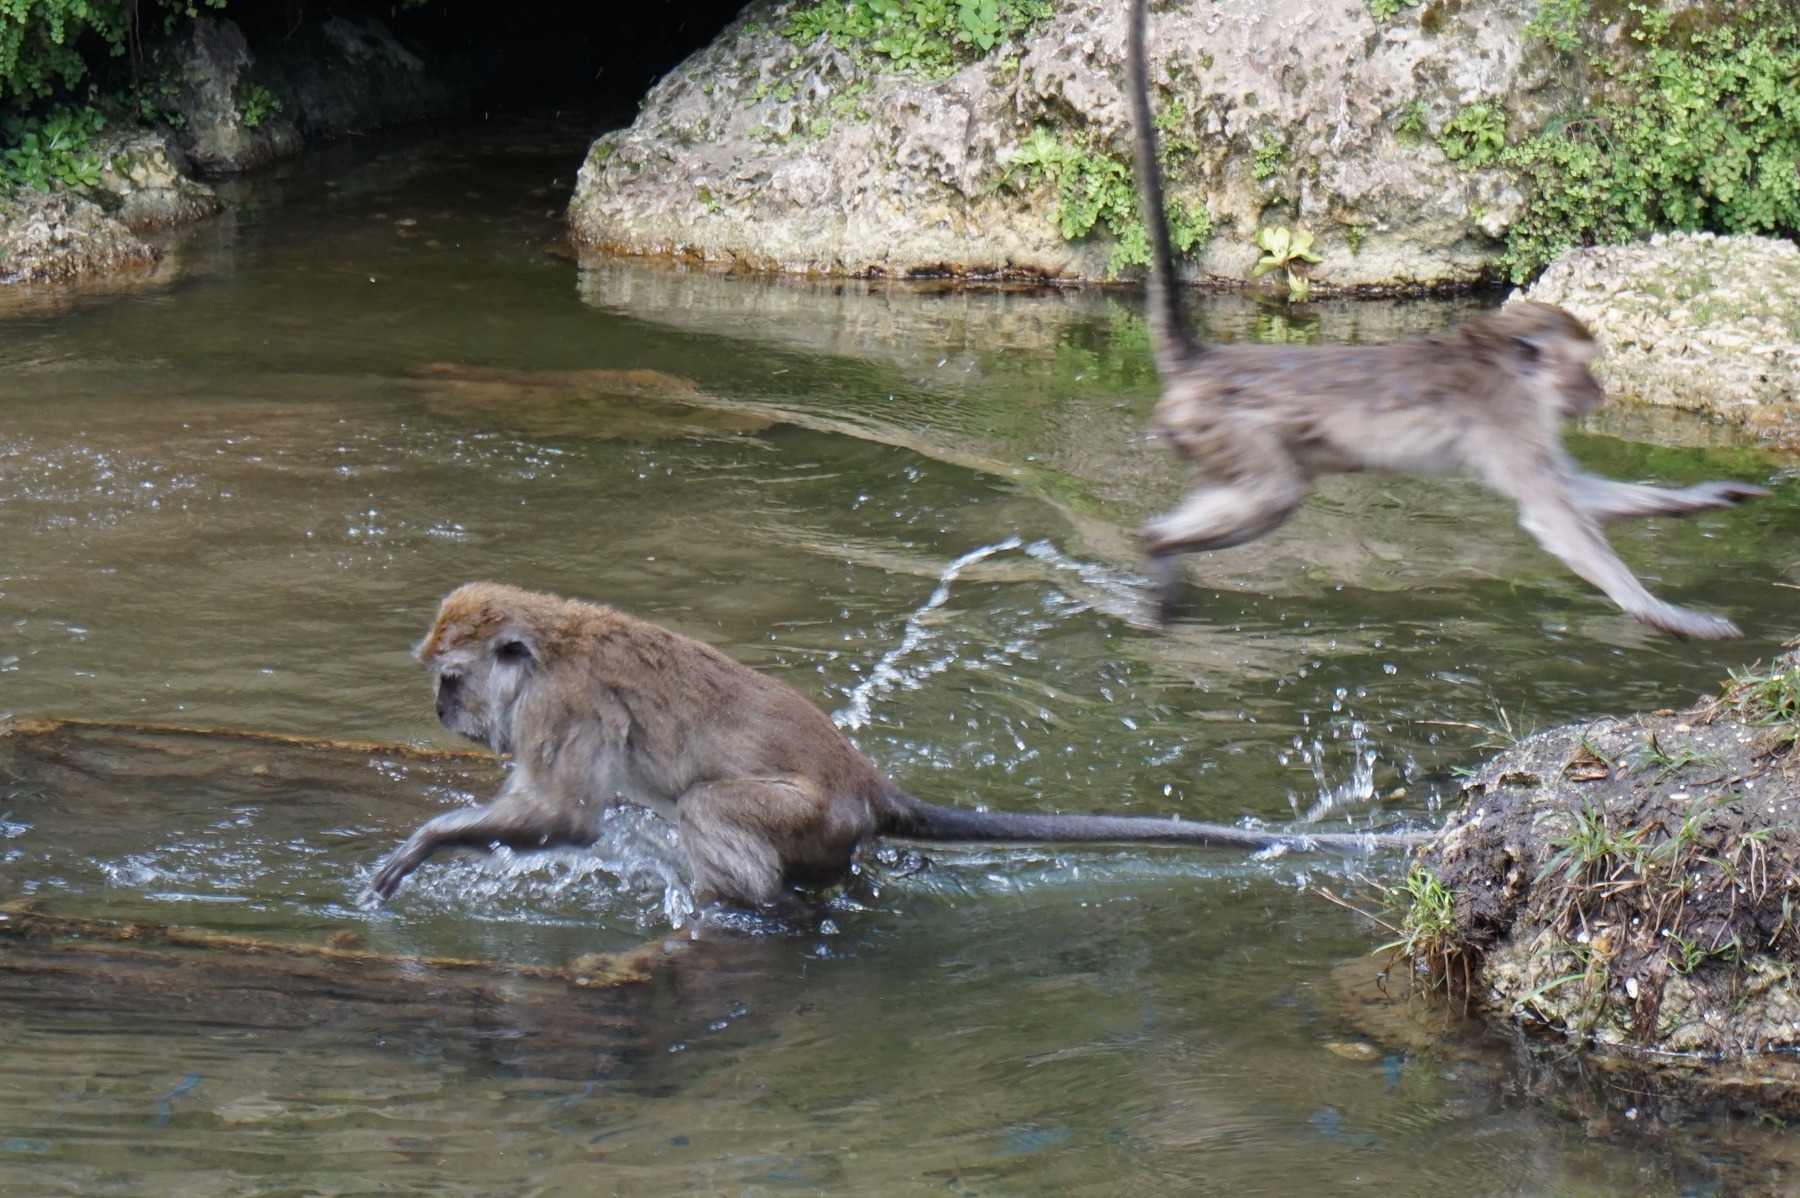 Java macaques love to play in the water at Monkey Jungle